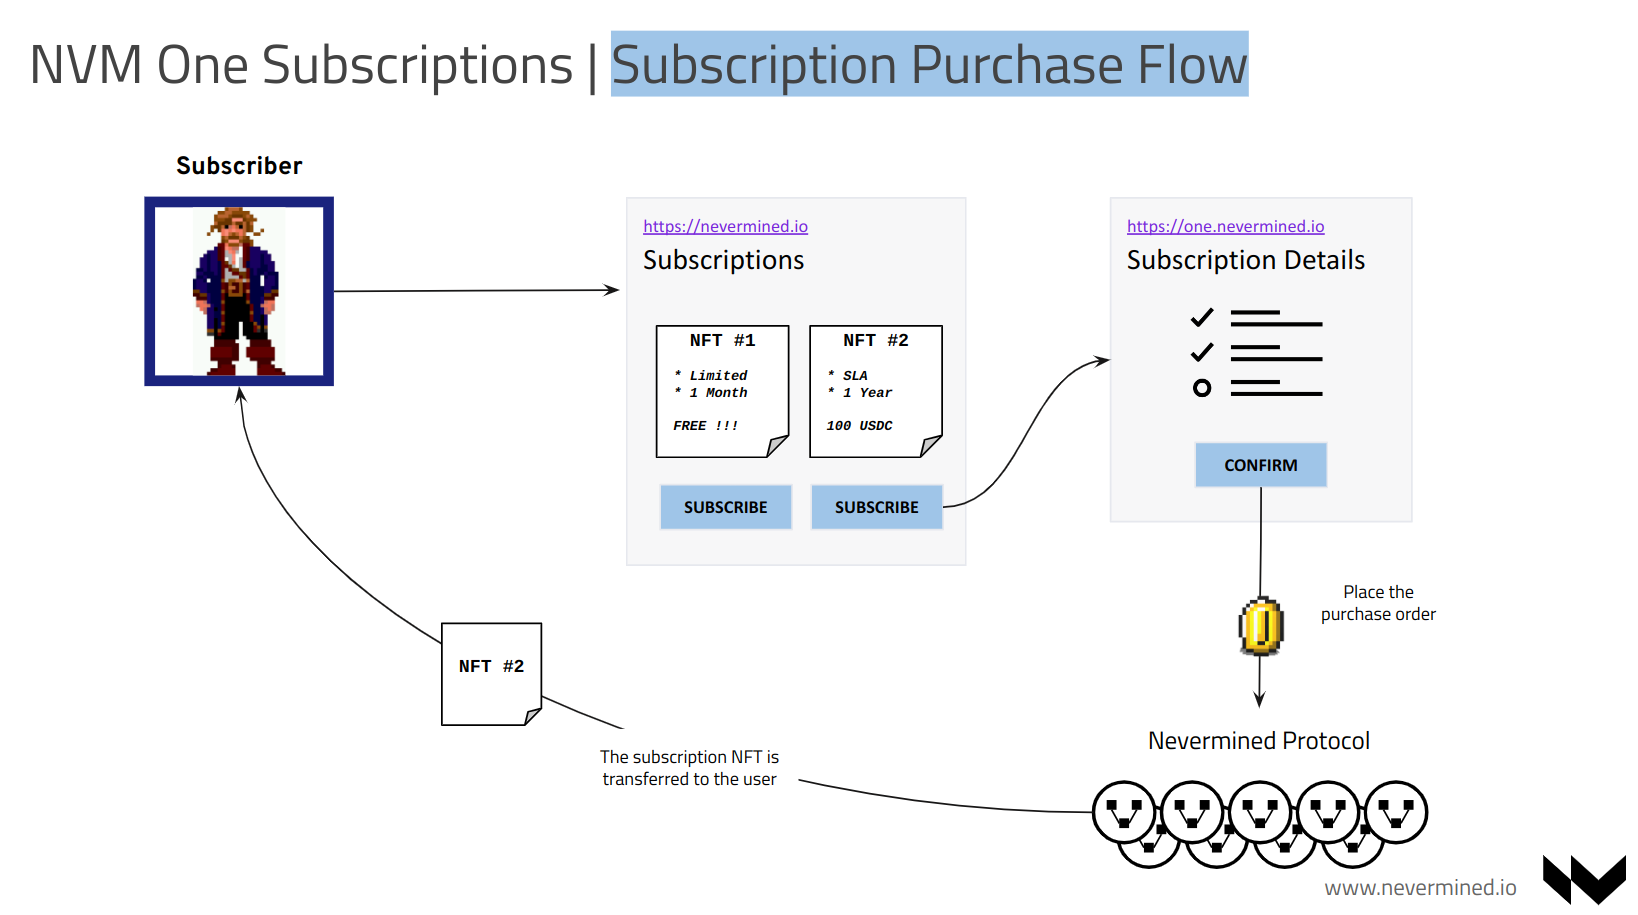 Subscription Purchase Flow